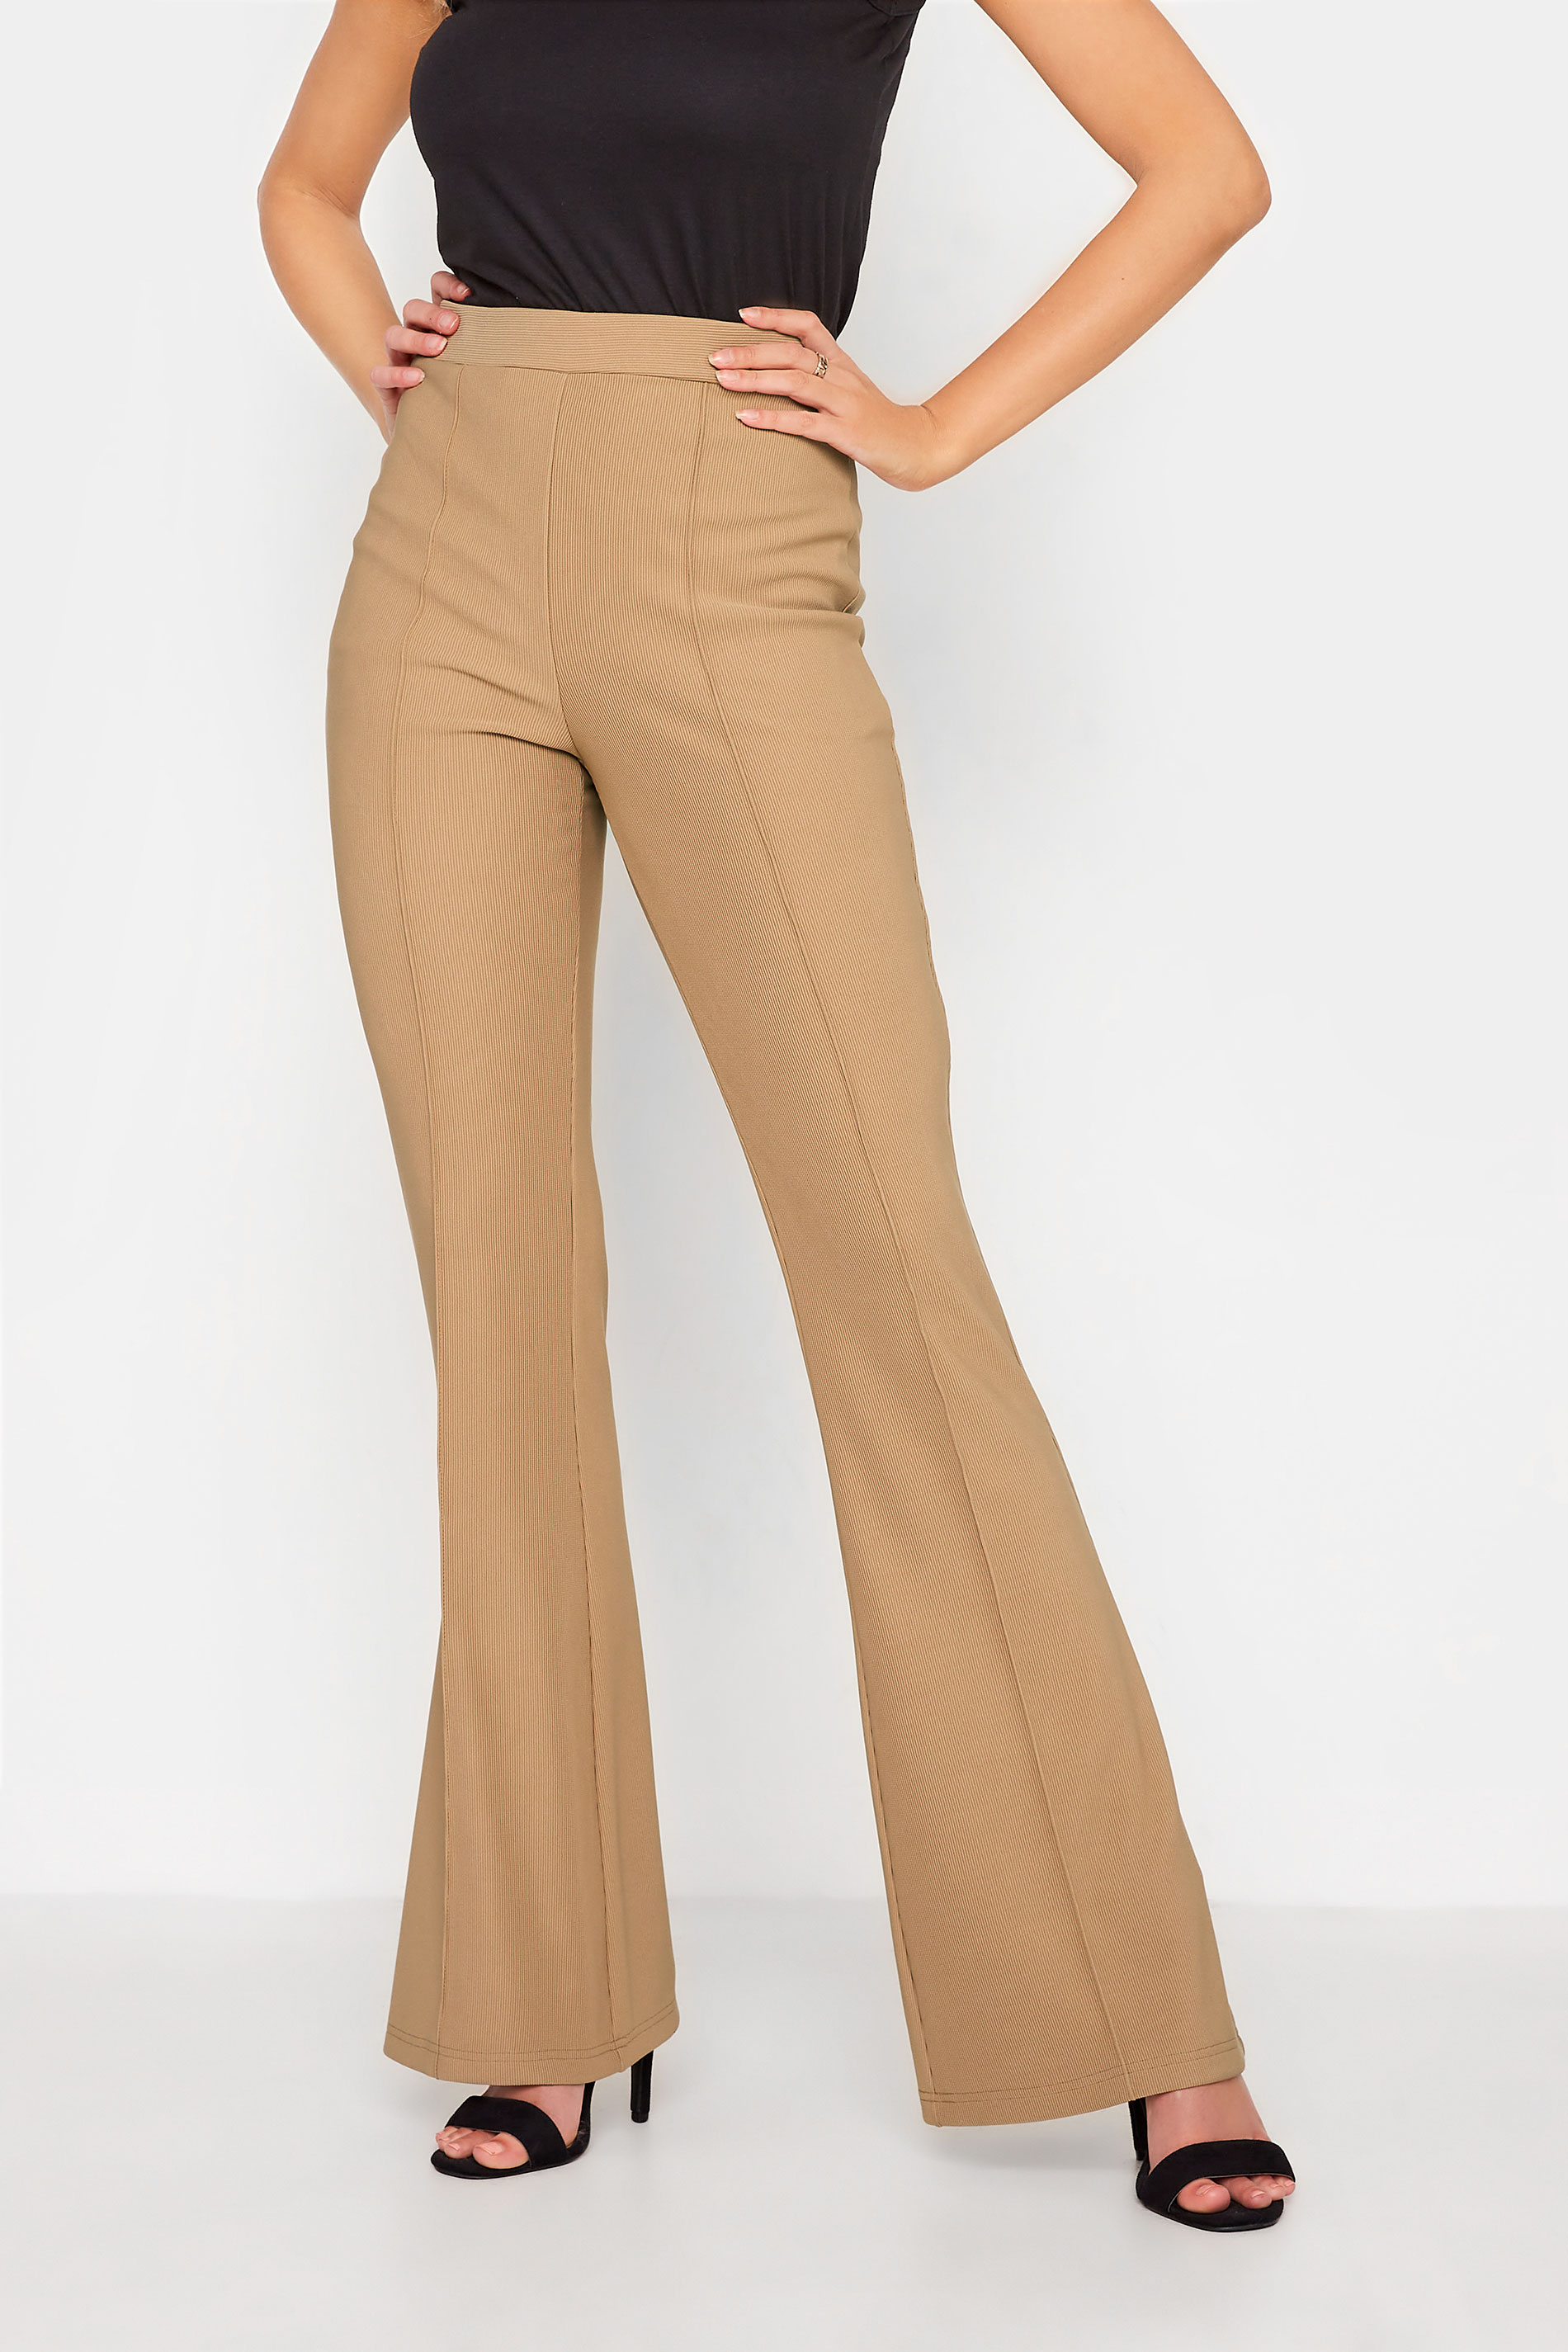 LTS Tall Camel Brown Ribbed Kick Flare Trousers_A.jpg